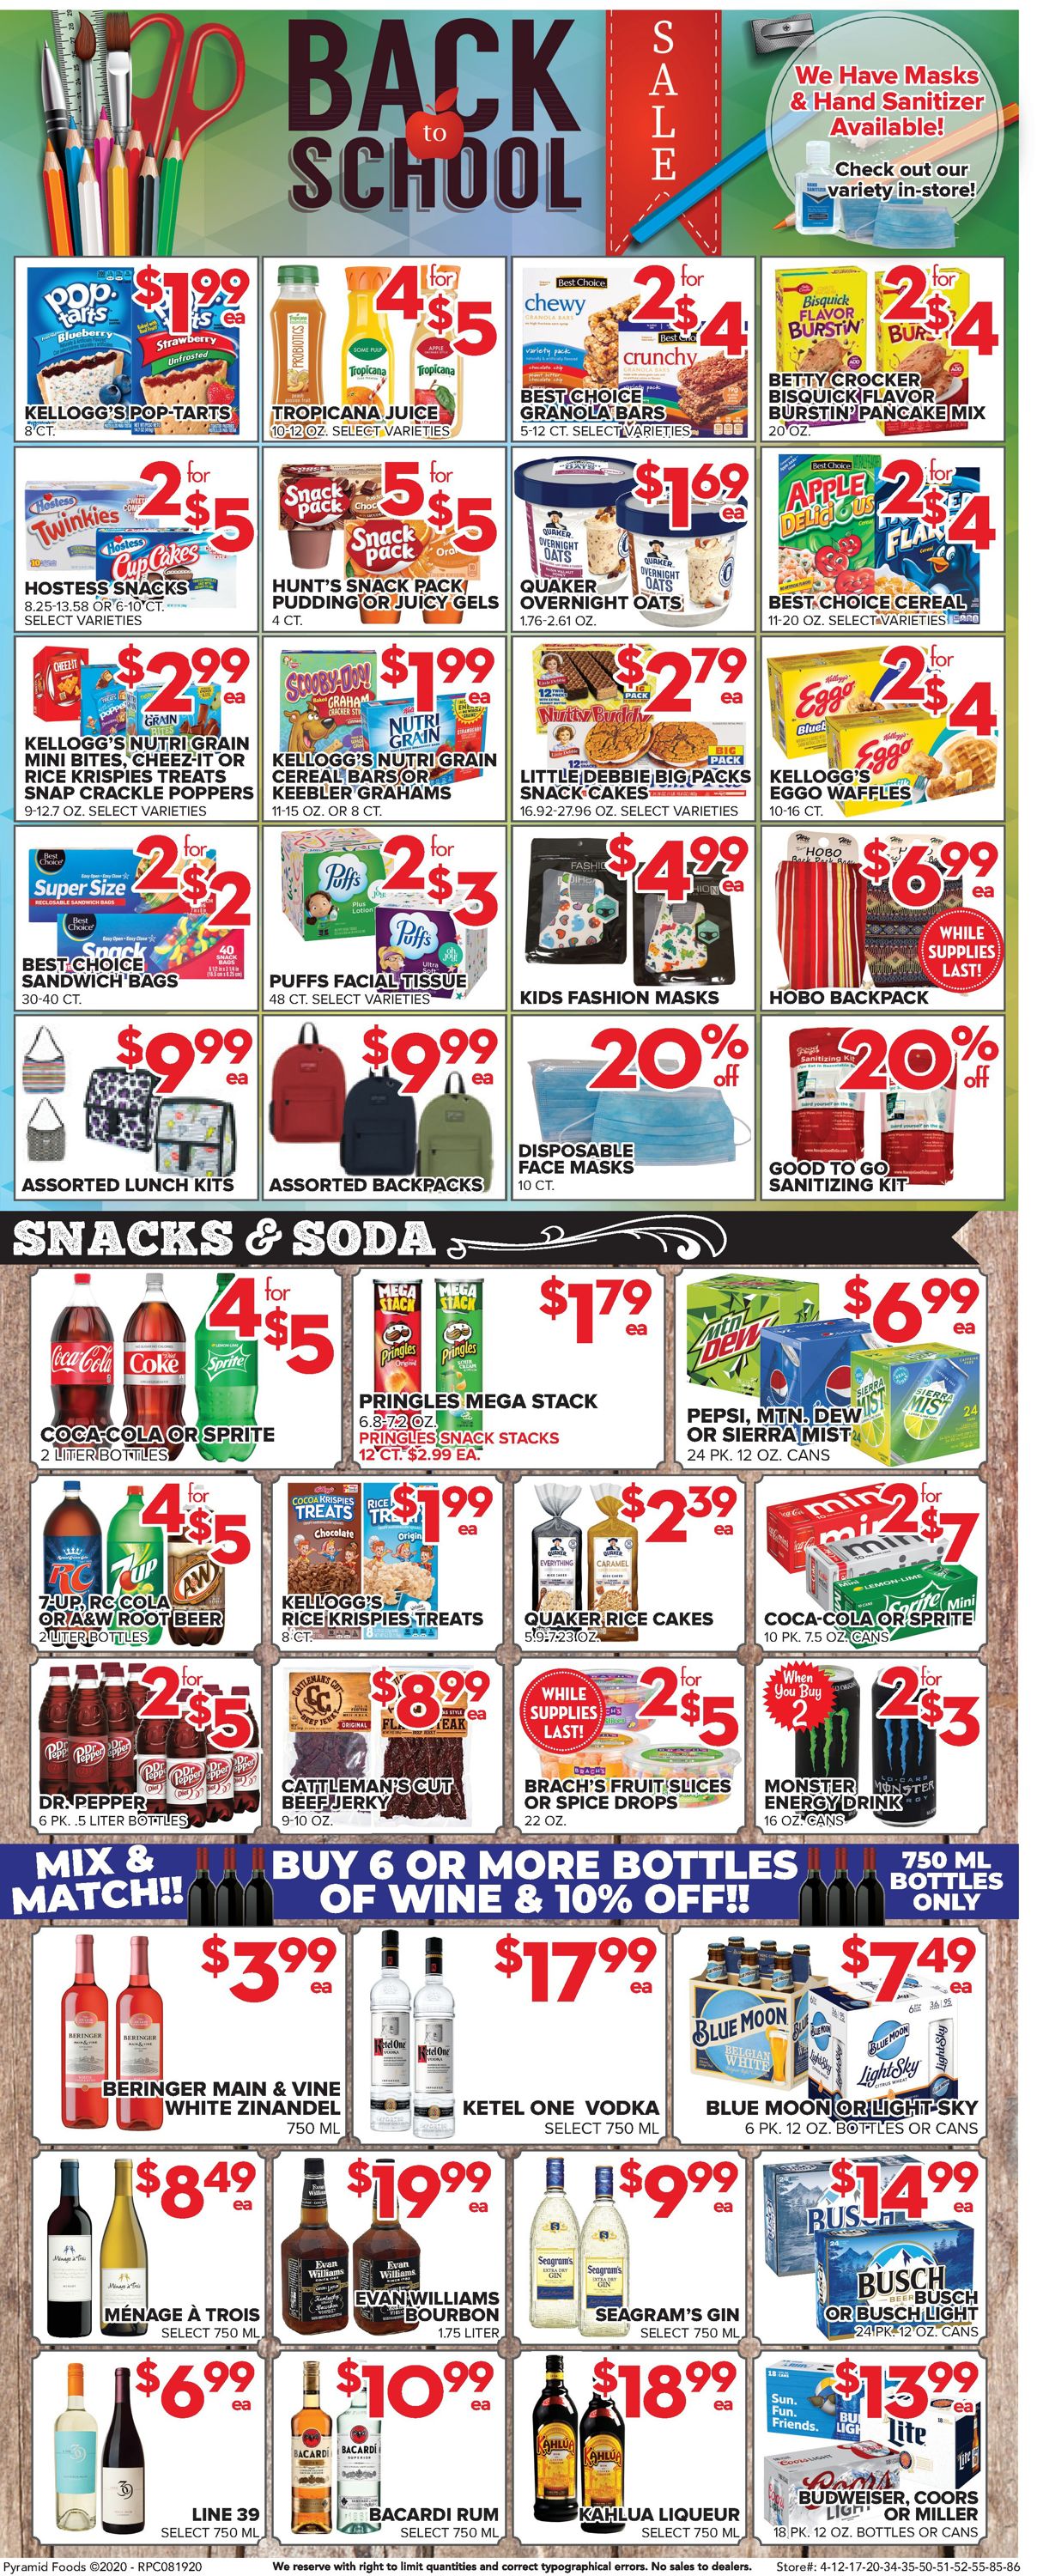 Price Cutter Weekly Ad Circular - valid 08/19-08/25/2020 (Page 4)